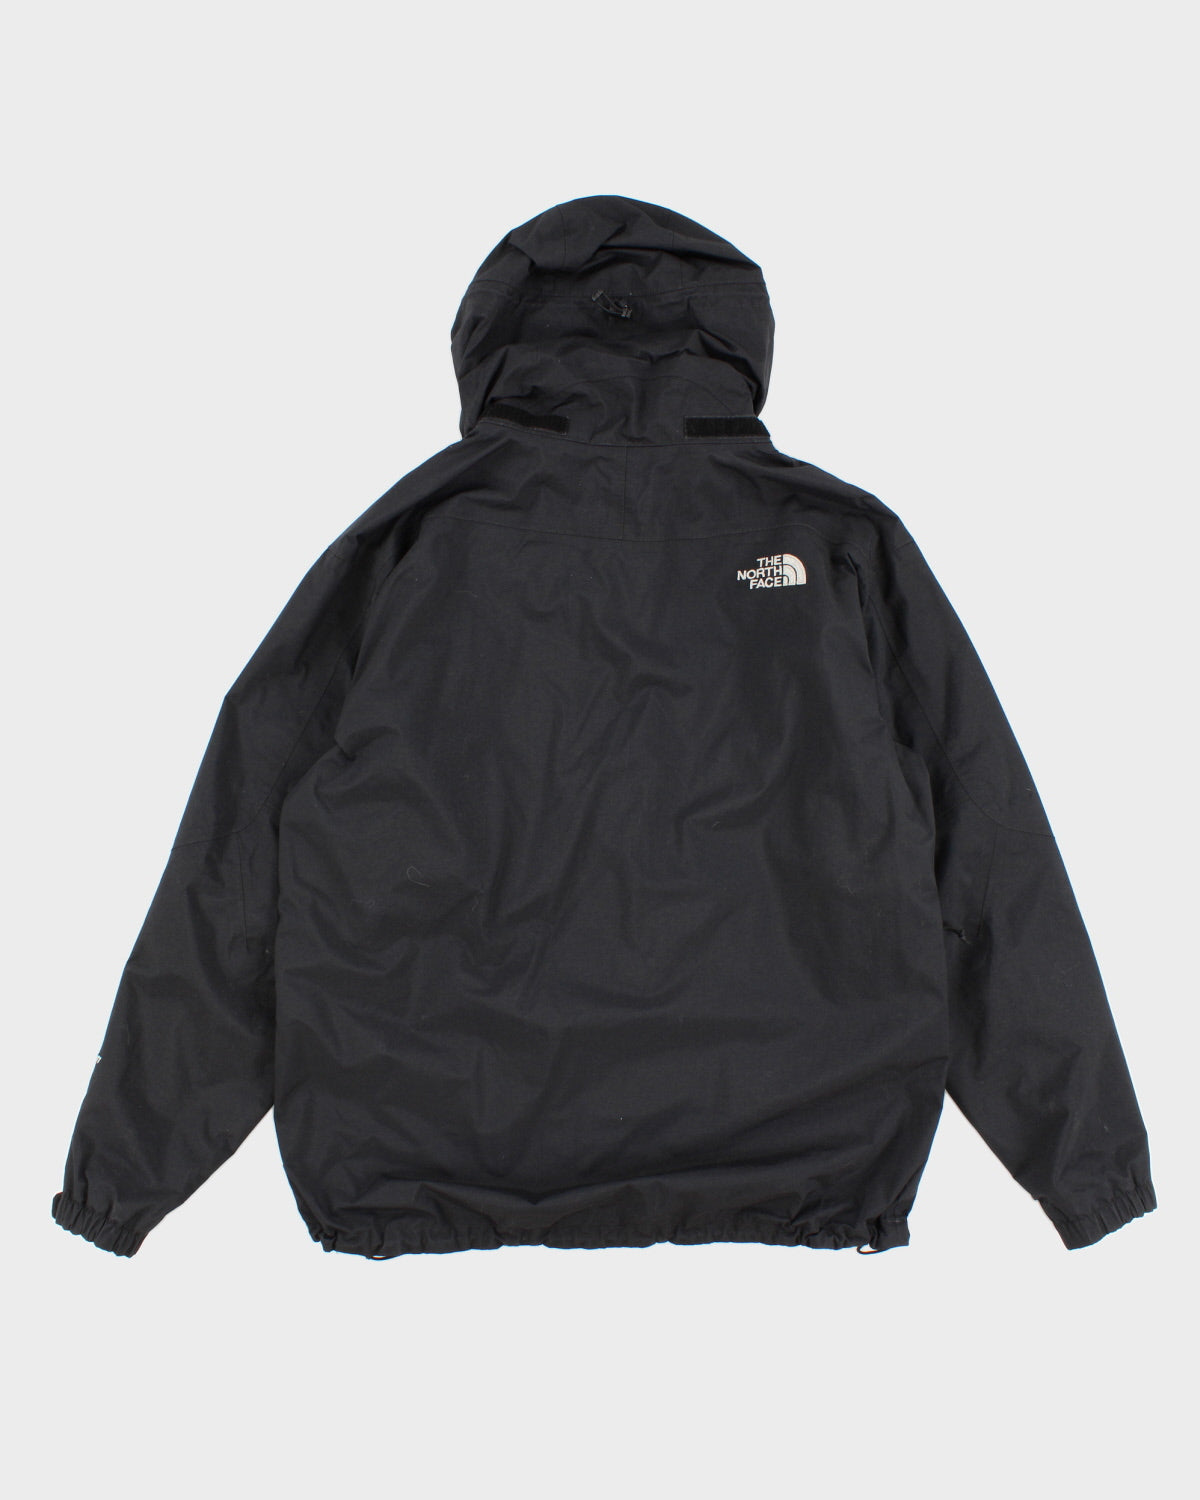 The North Face Hooded Black Jacket - M